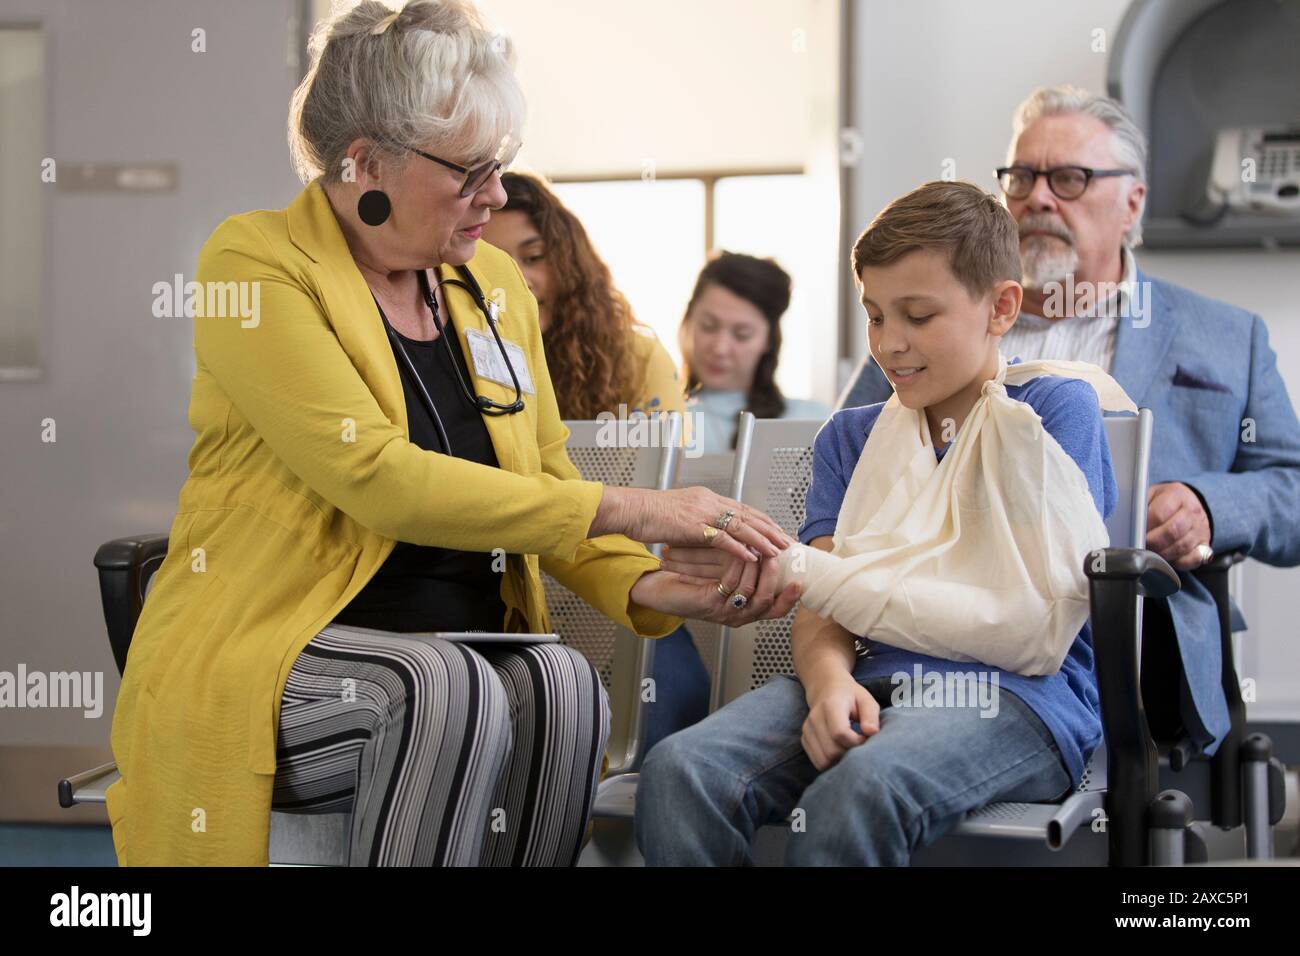 Female doctor examining hand of boy patient with arm in sling in clinic lobby Stock Photo